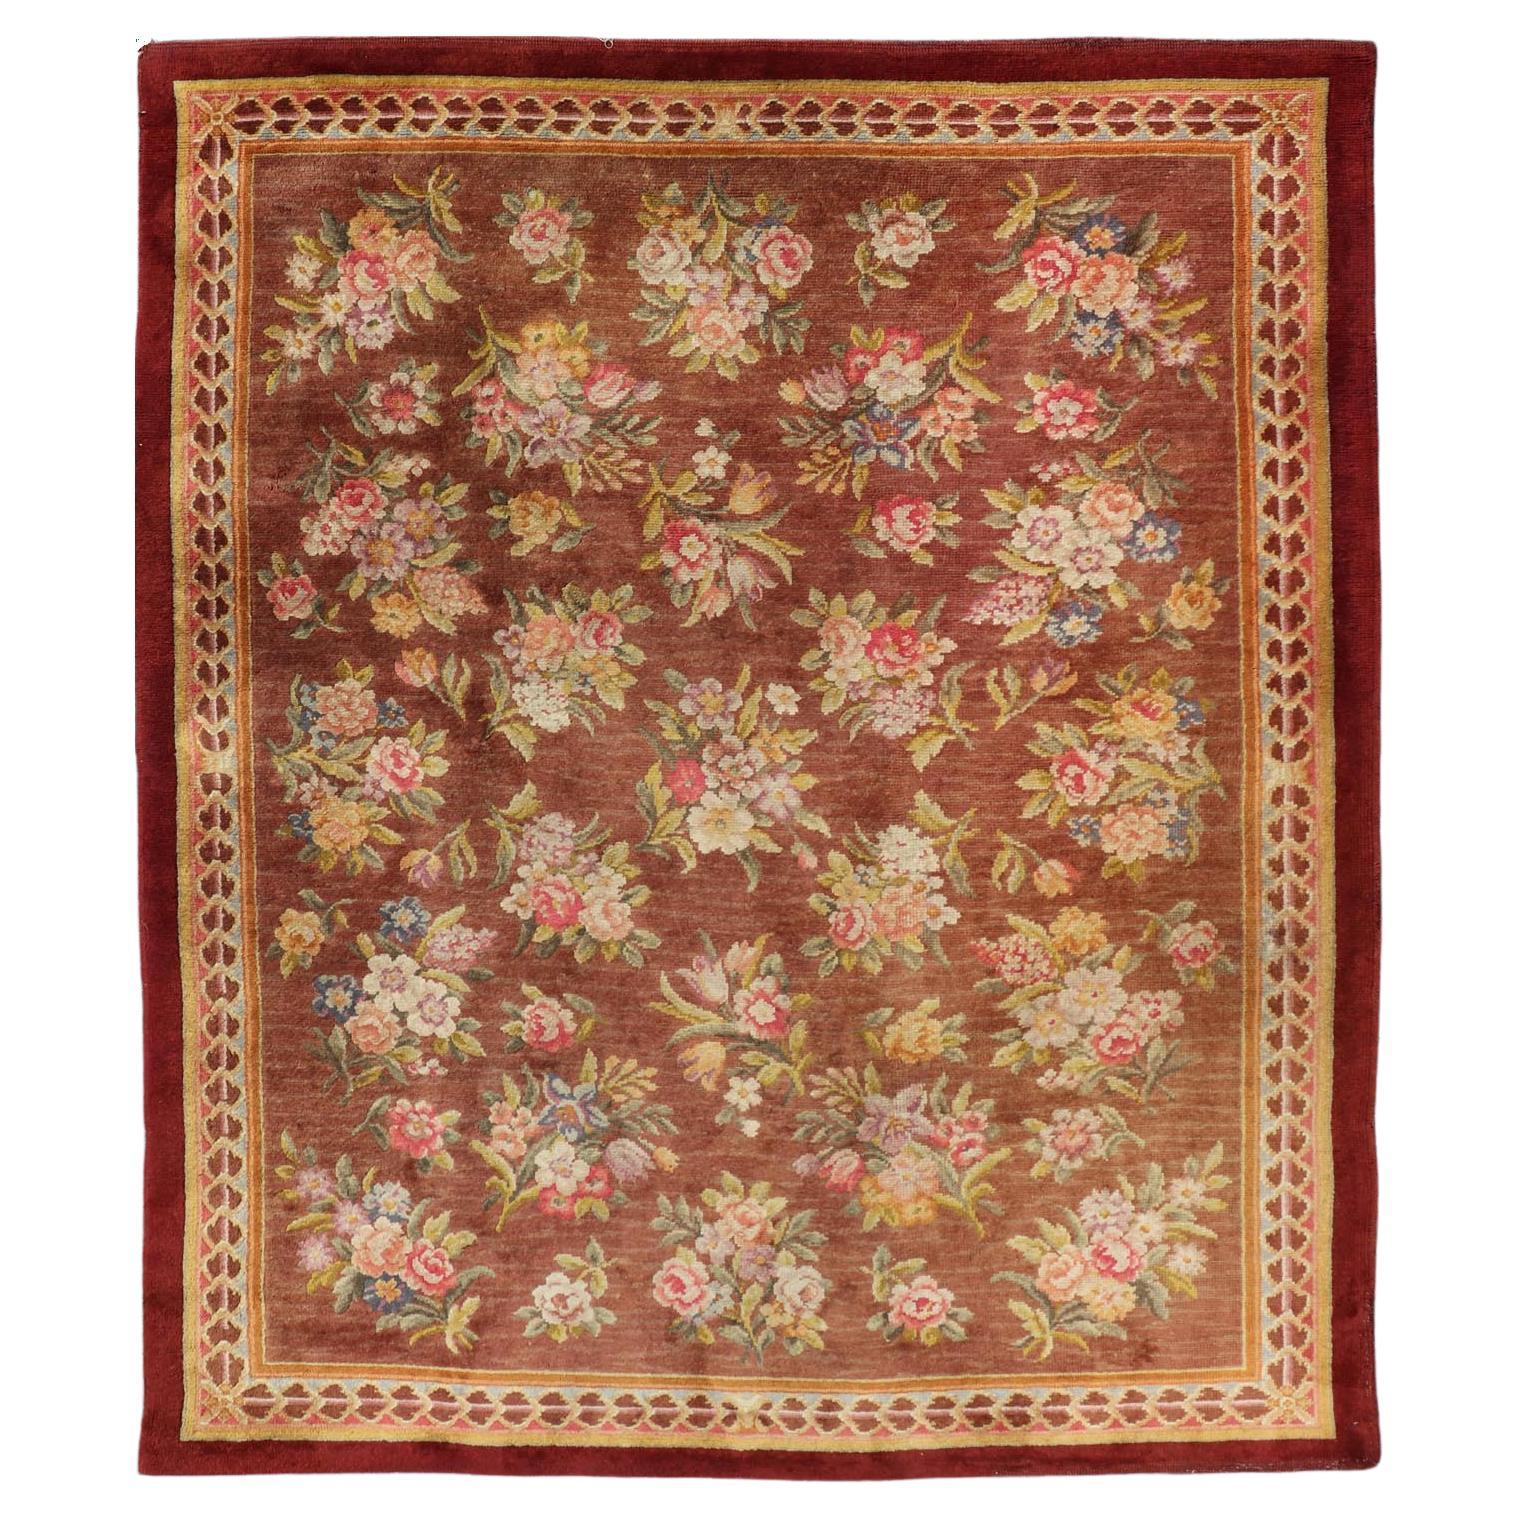 Antique Hand Knotted European Savonnerie Rug in Wool with Floral Design